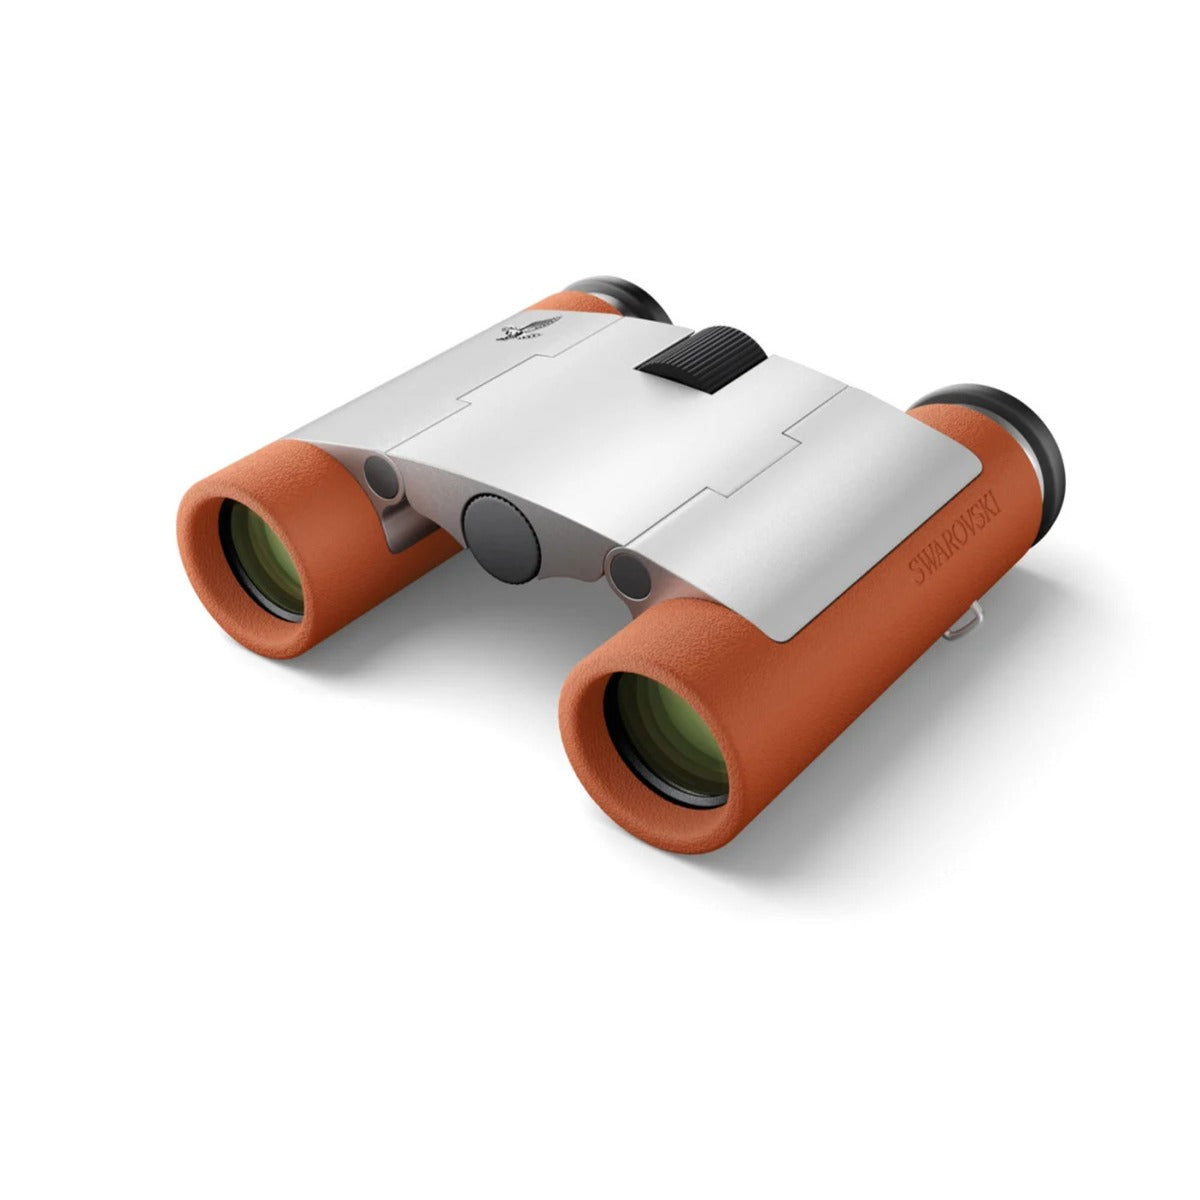 Swarovski 7x21 CL Curio compact binoculars - Burnt Orange - Product Photo 1 - High resolution photo of the binoculars from a front, top down perspective